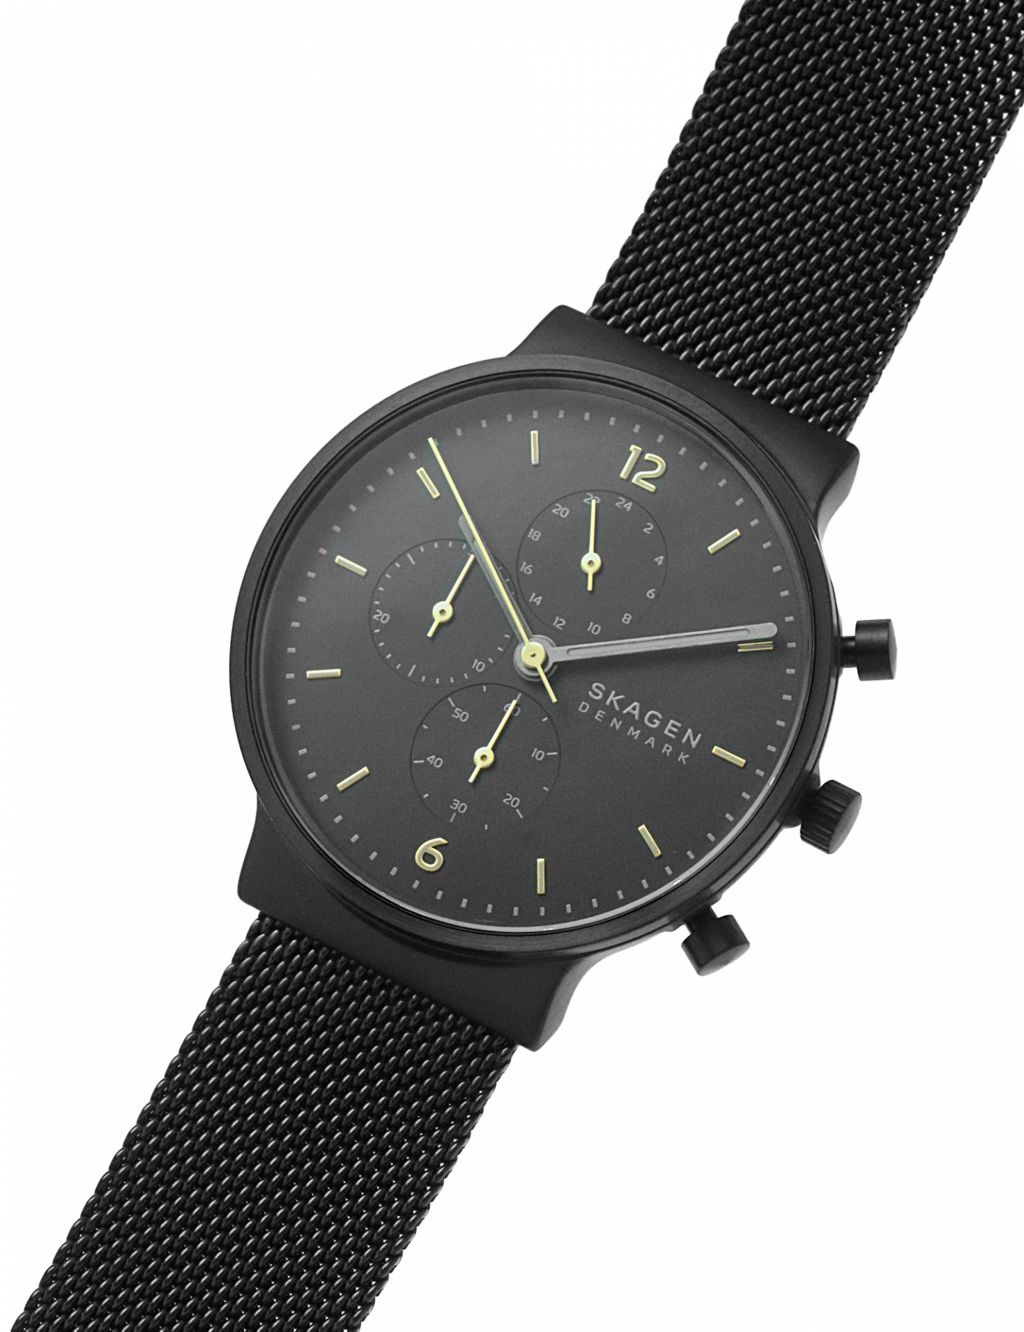 Skagen Anchor Chronograph Black Stainless Steel Watch image 5